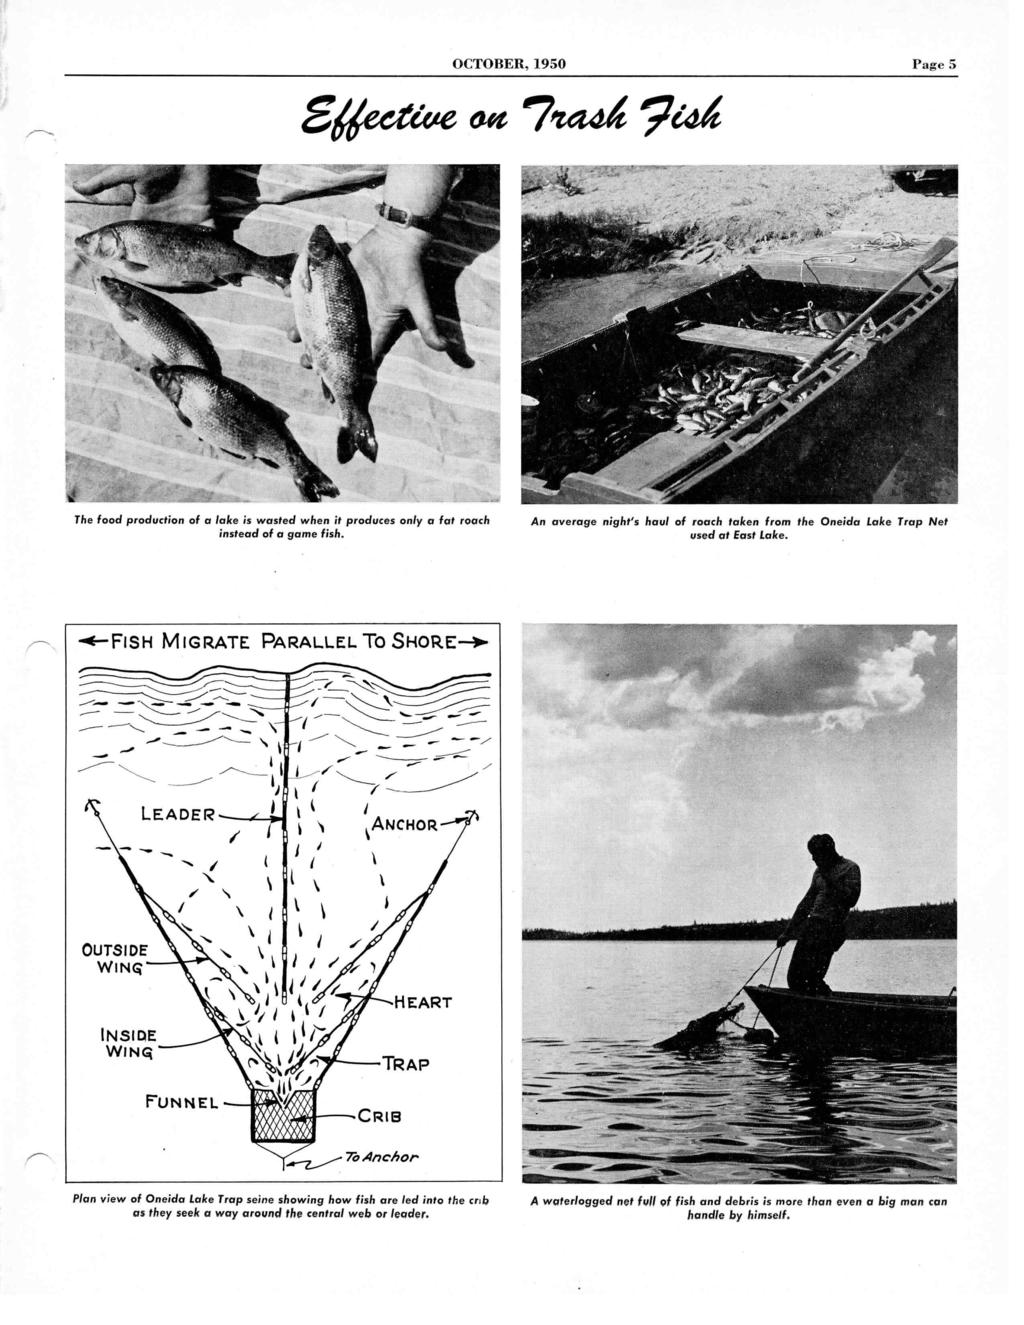 OCTOBER, 1950 Page 5 gljecrive wet?tad 7ed The food production of a lake is wasted when it produces only a fat roach instead of a game fish.